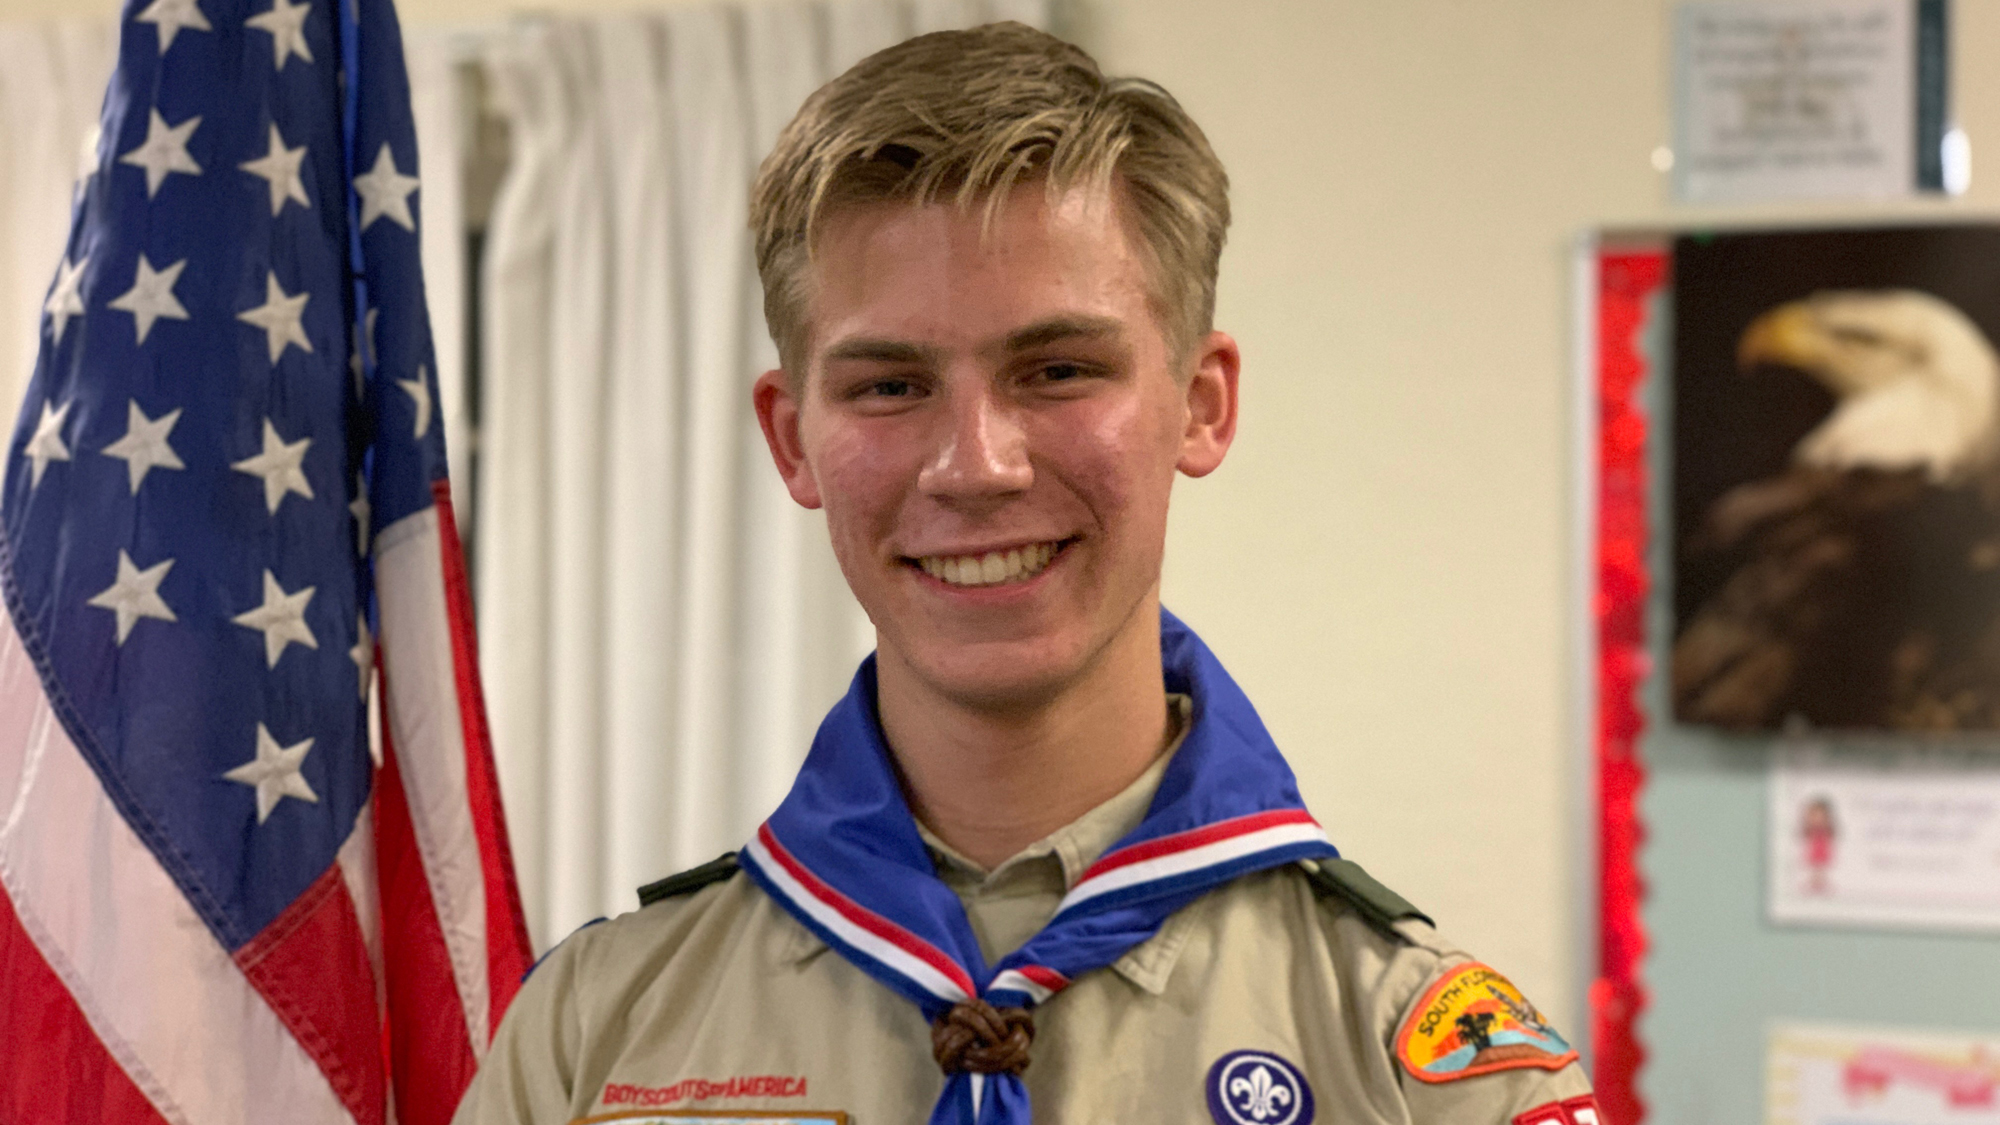 Coral Springs Resident Earns Eagle Scout Rank